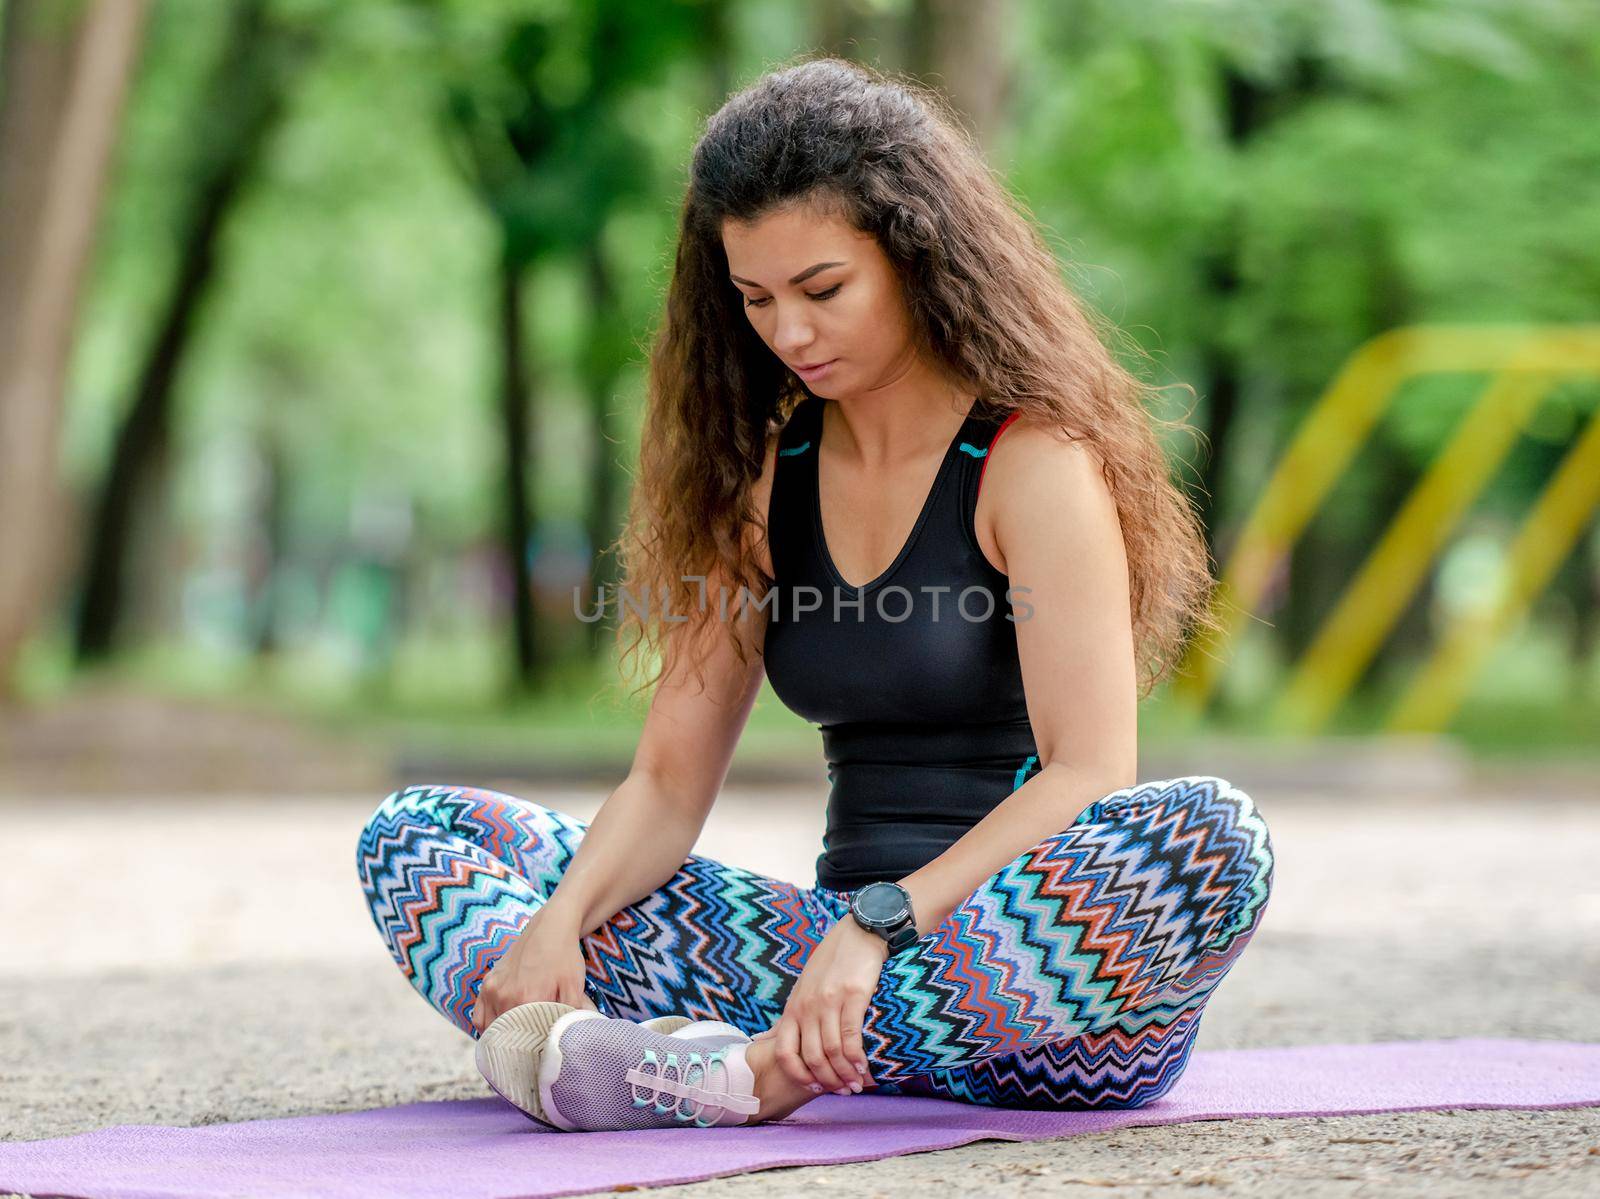 Girl stretching in butterfly pose outdoors at stadium. Pretty woman doing yoga workout at summertime